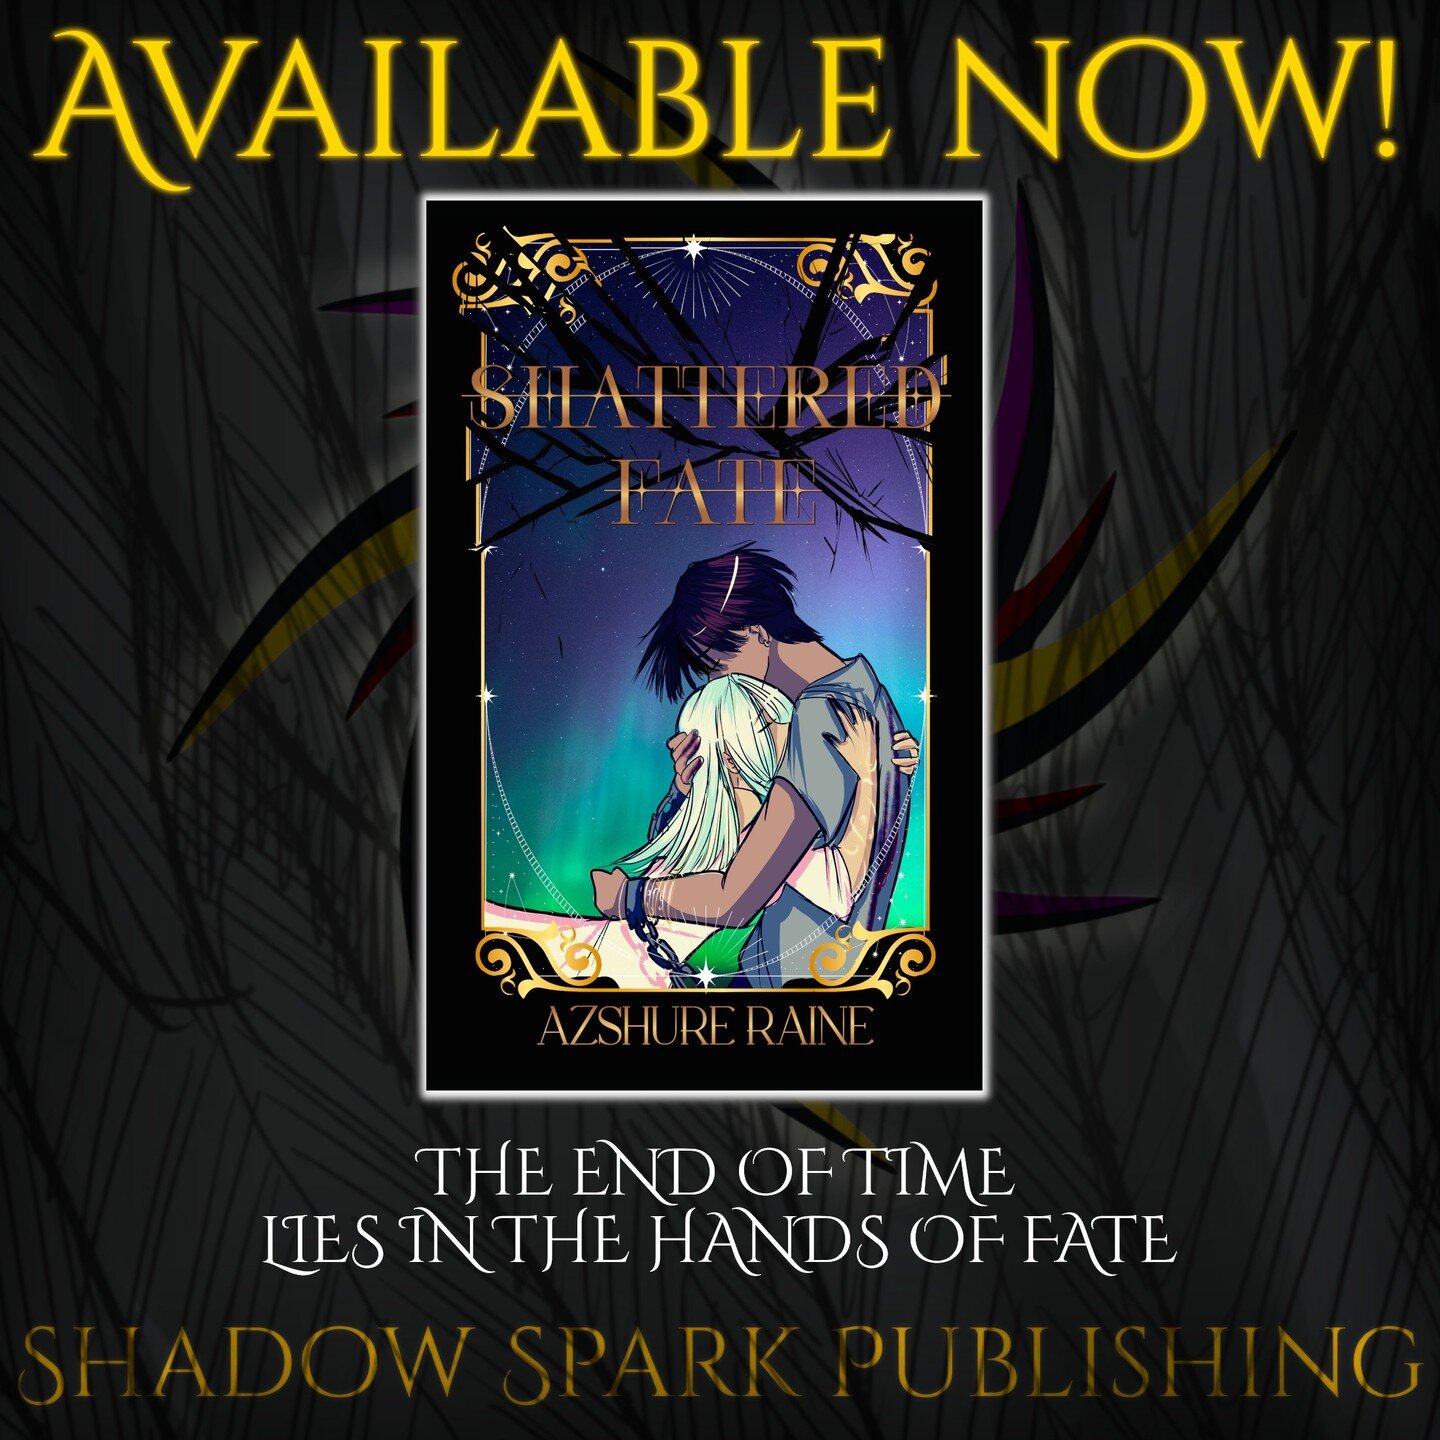 ⌛THE END OF TIME LIES IN THE HANDS OF FATE⌛

Now available from SSP, the thrilling conclusion to @azshure's Zodiac trilogy, SHATTERED FATE. Check out the blurb, then follow the link in our bio to grab your copy!

⌛BLURB⌛
War is on the horizon after t